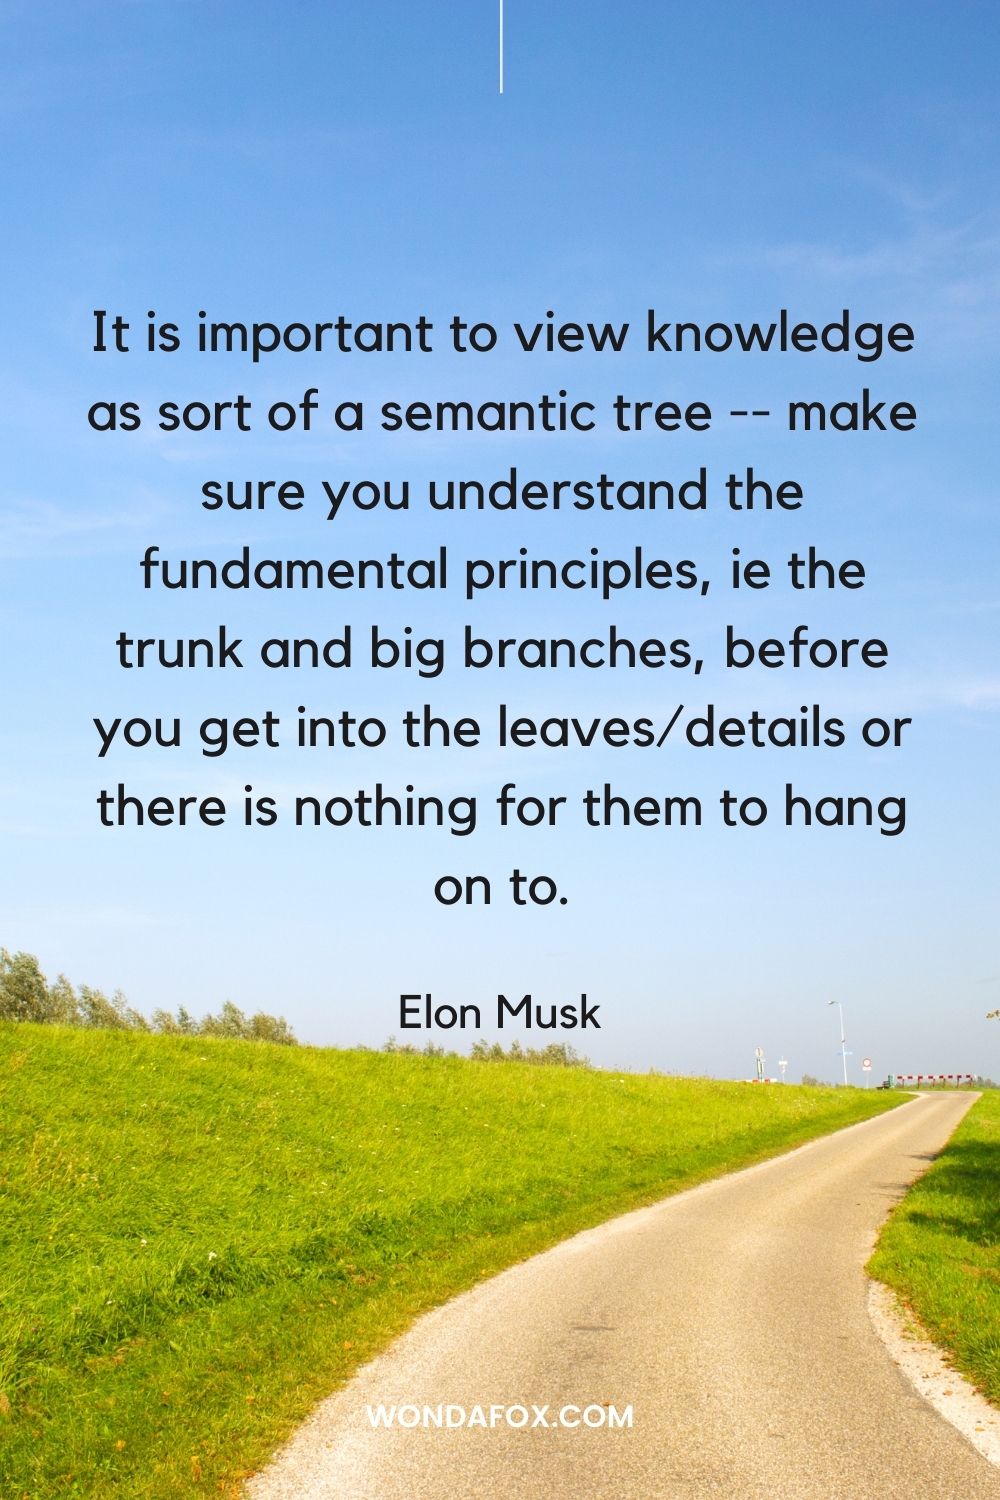 It is important to view knowledge as sort of a semantic tree -- make sure you understand the fundamental principles, ie the trunk and big branches, before you get into the leaves/details or there is nothing for them to hang on to.